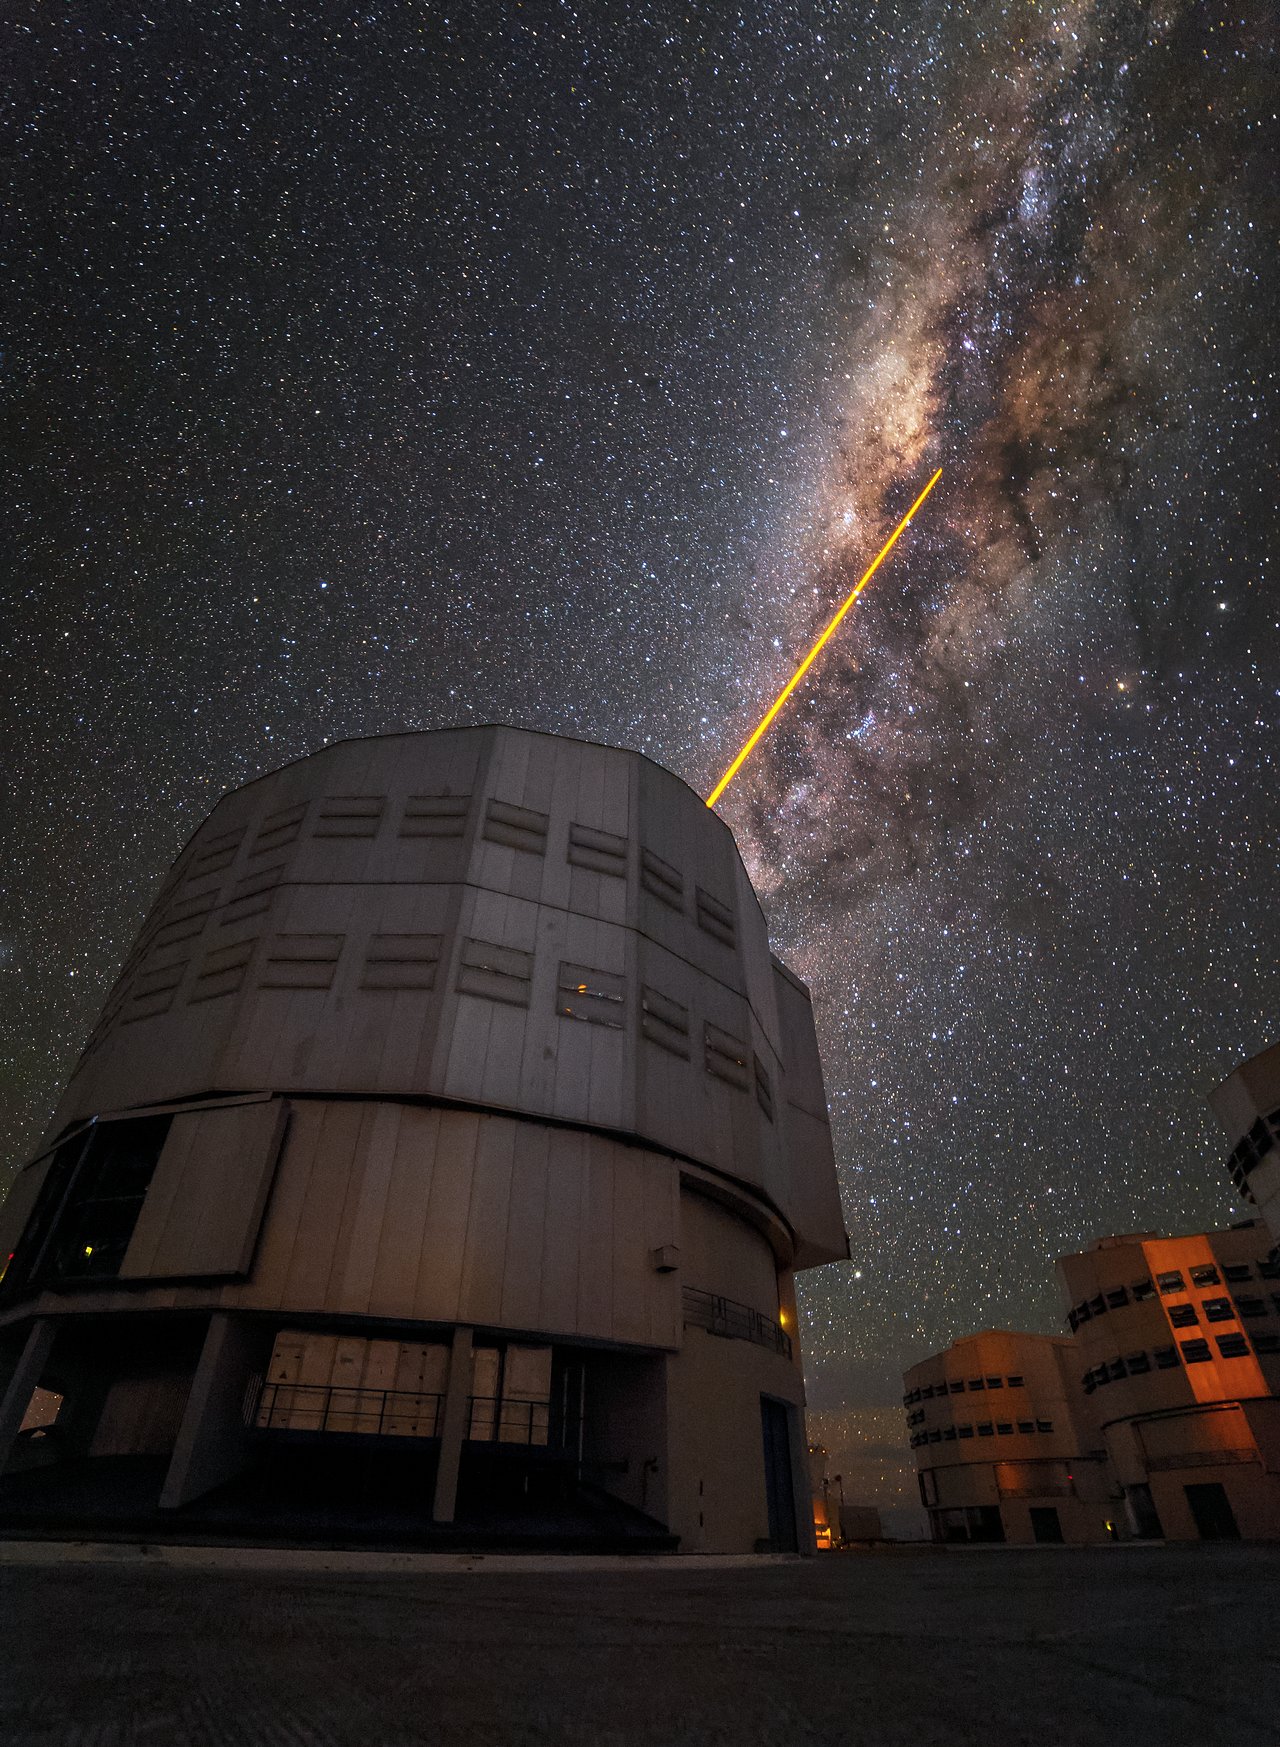 VLT spies on the Milky Way